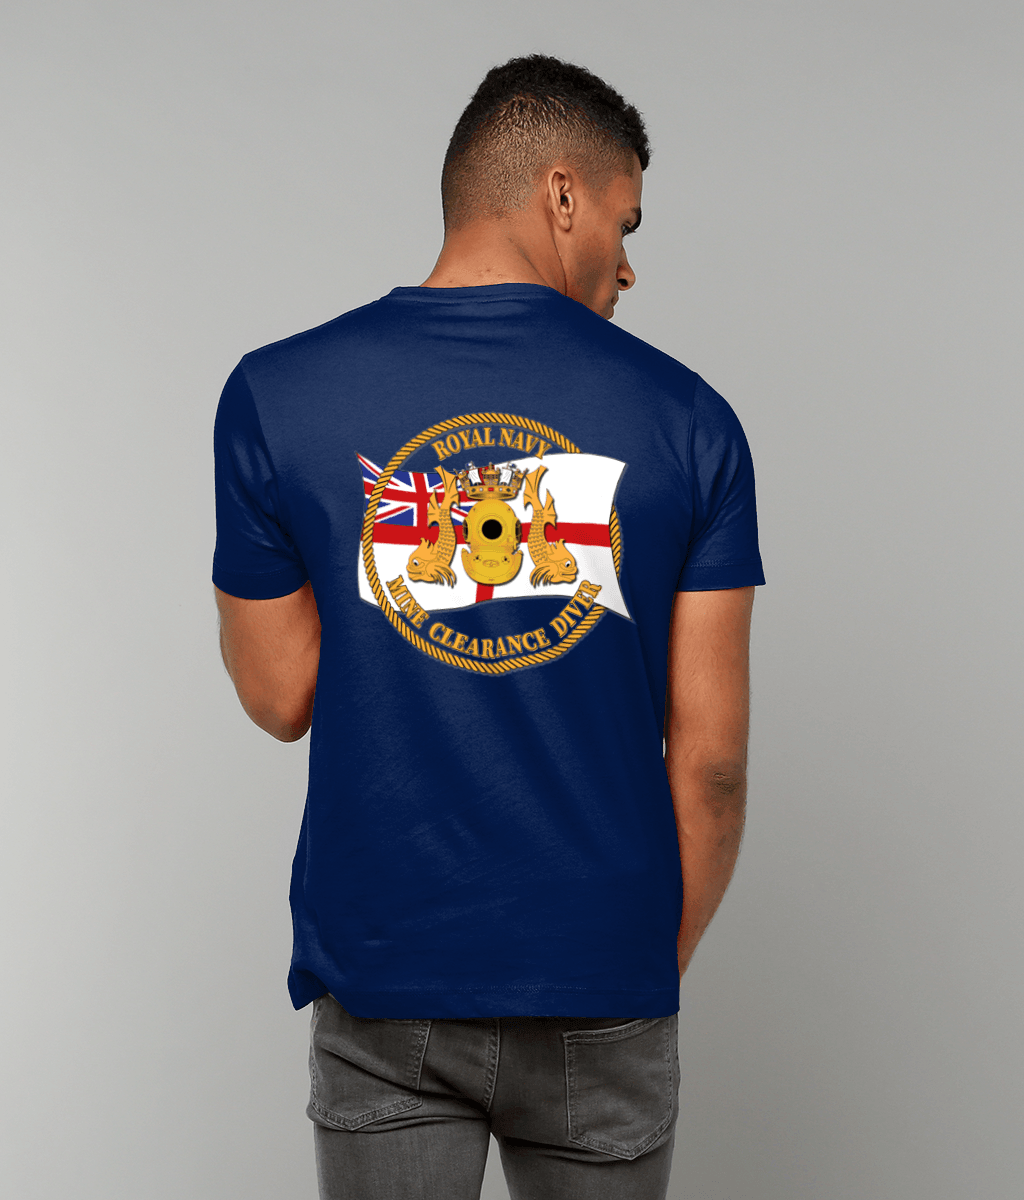 63 - RNCD with White Ensign - Clear Background - T-Shirt (Printed Front and Back) - Divers Gifts